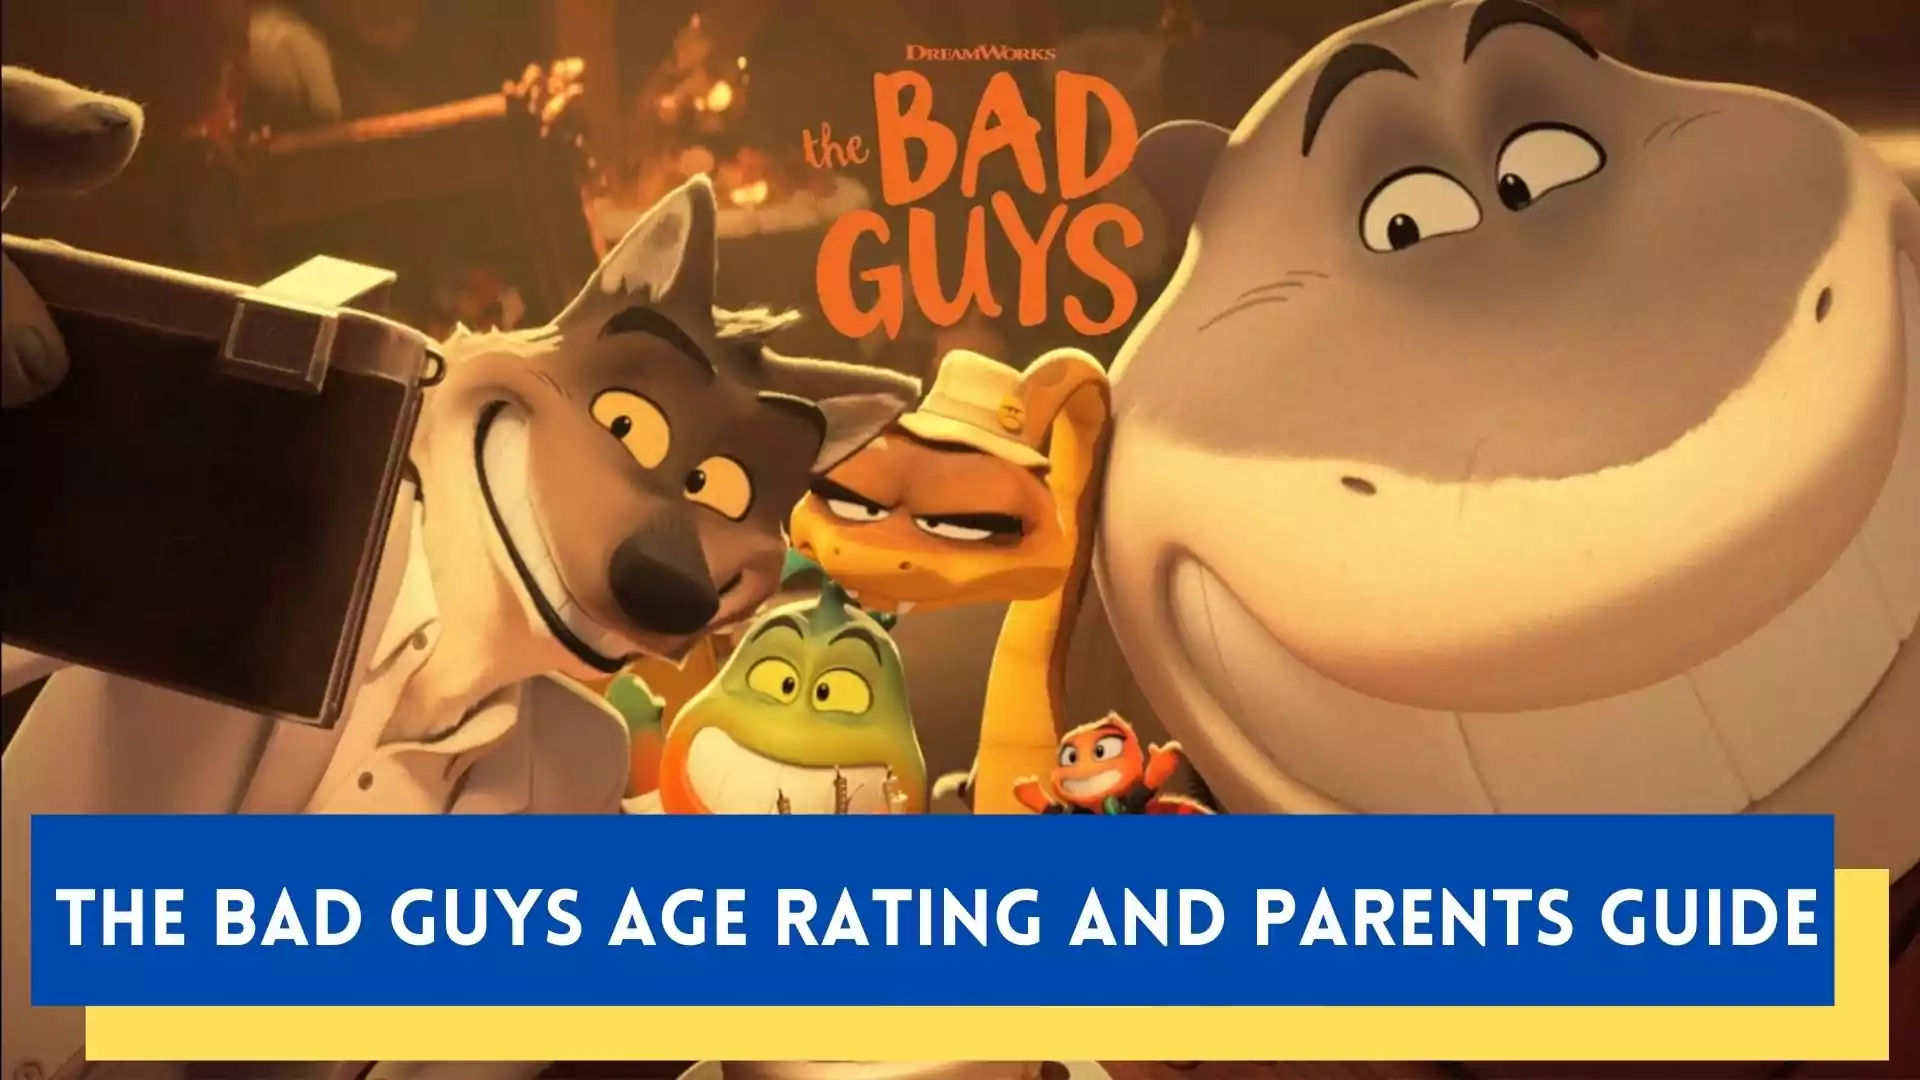 The Bad Guys Parents Guide | The Bad Guys Age Rating (2022)